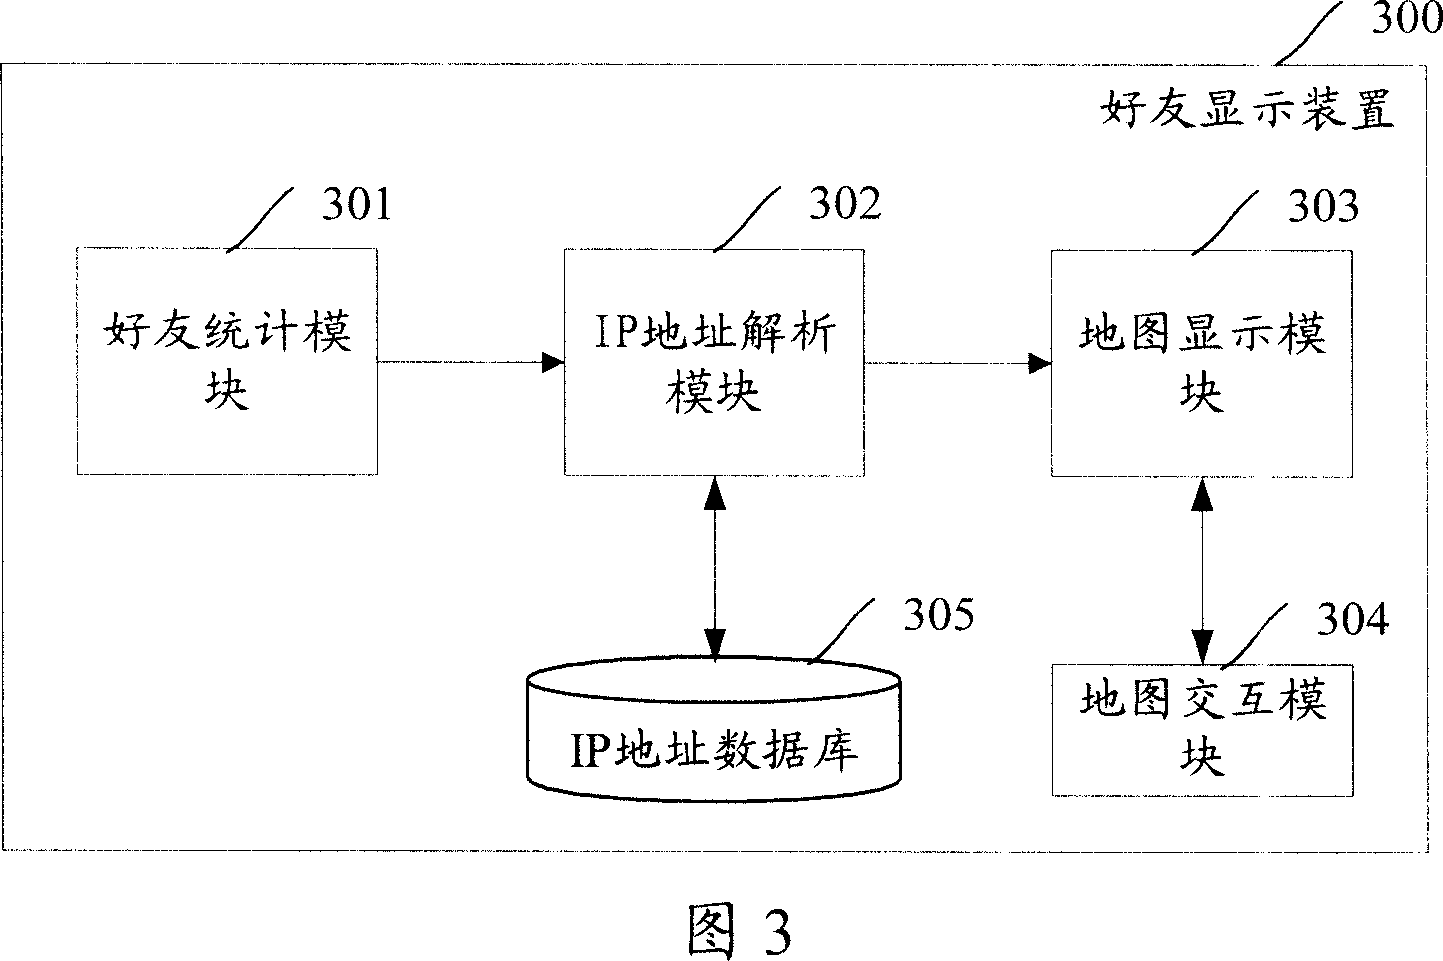 Friend display device and display method based on instant communication